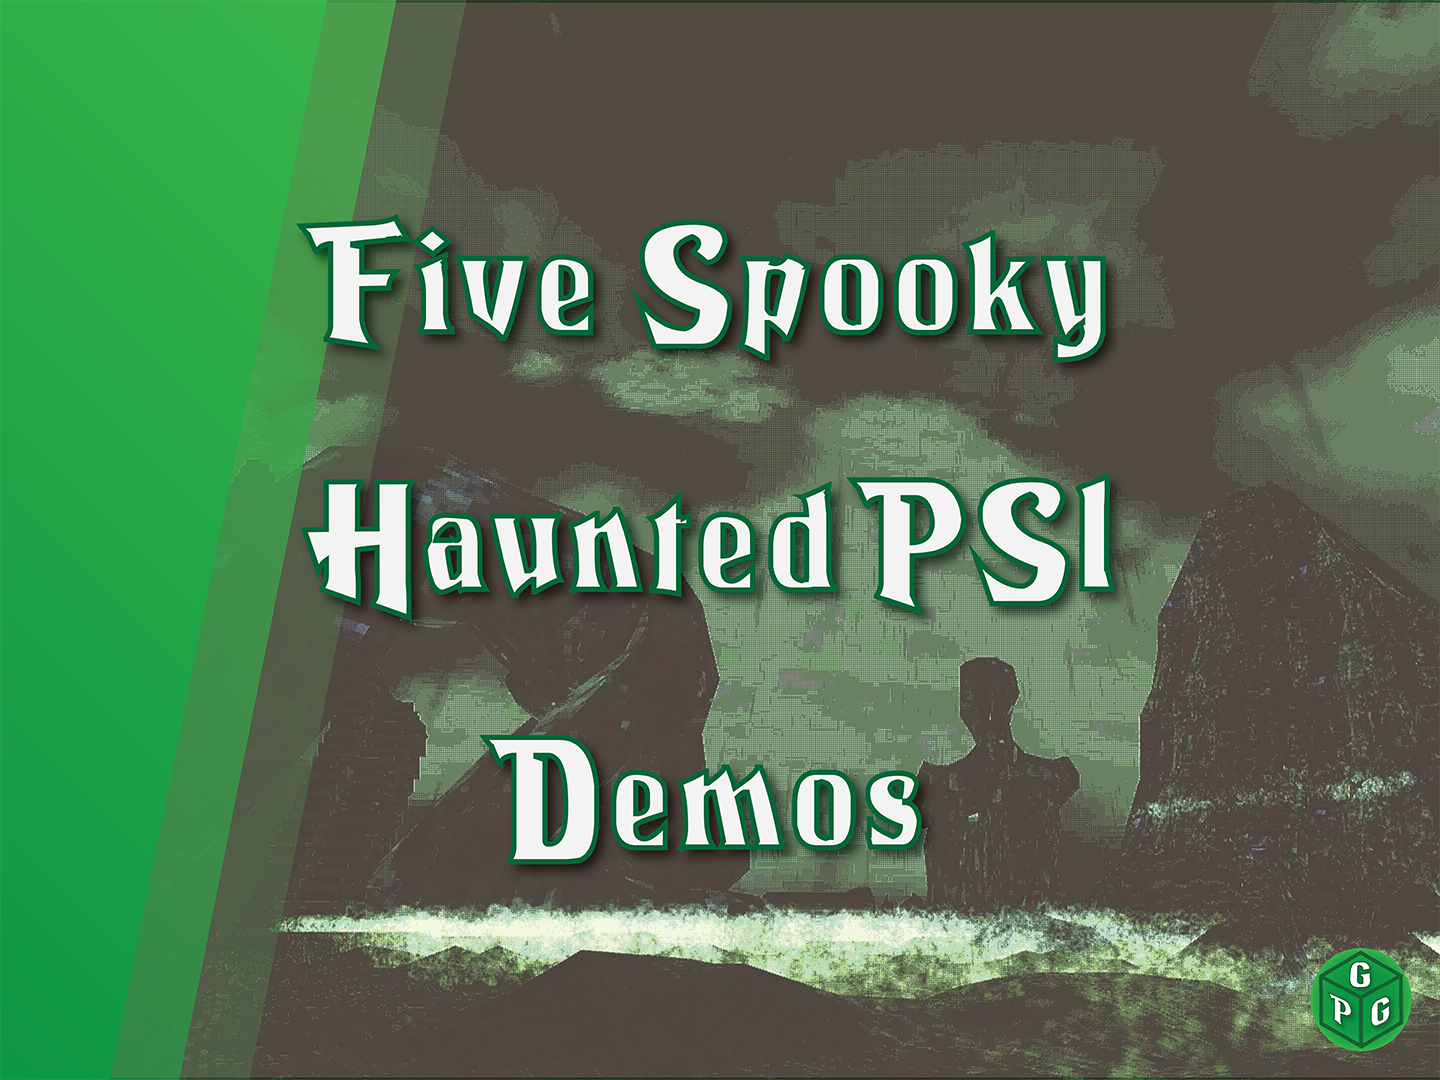 Five Spooky Haunted PS1 Demos. Background depicts a low-poly landscape of jagged rocks, pouring rain, and the silhouette of a broken, limbless statue.